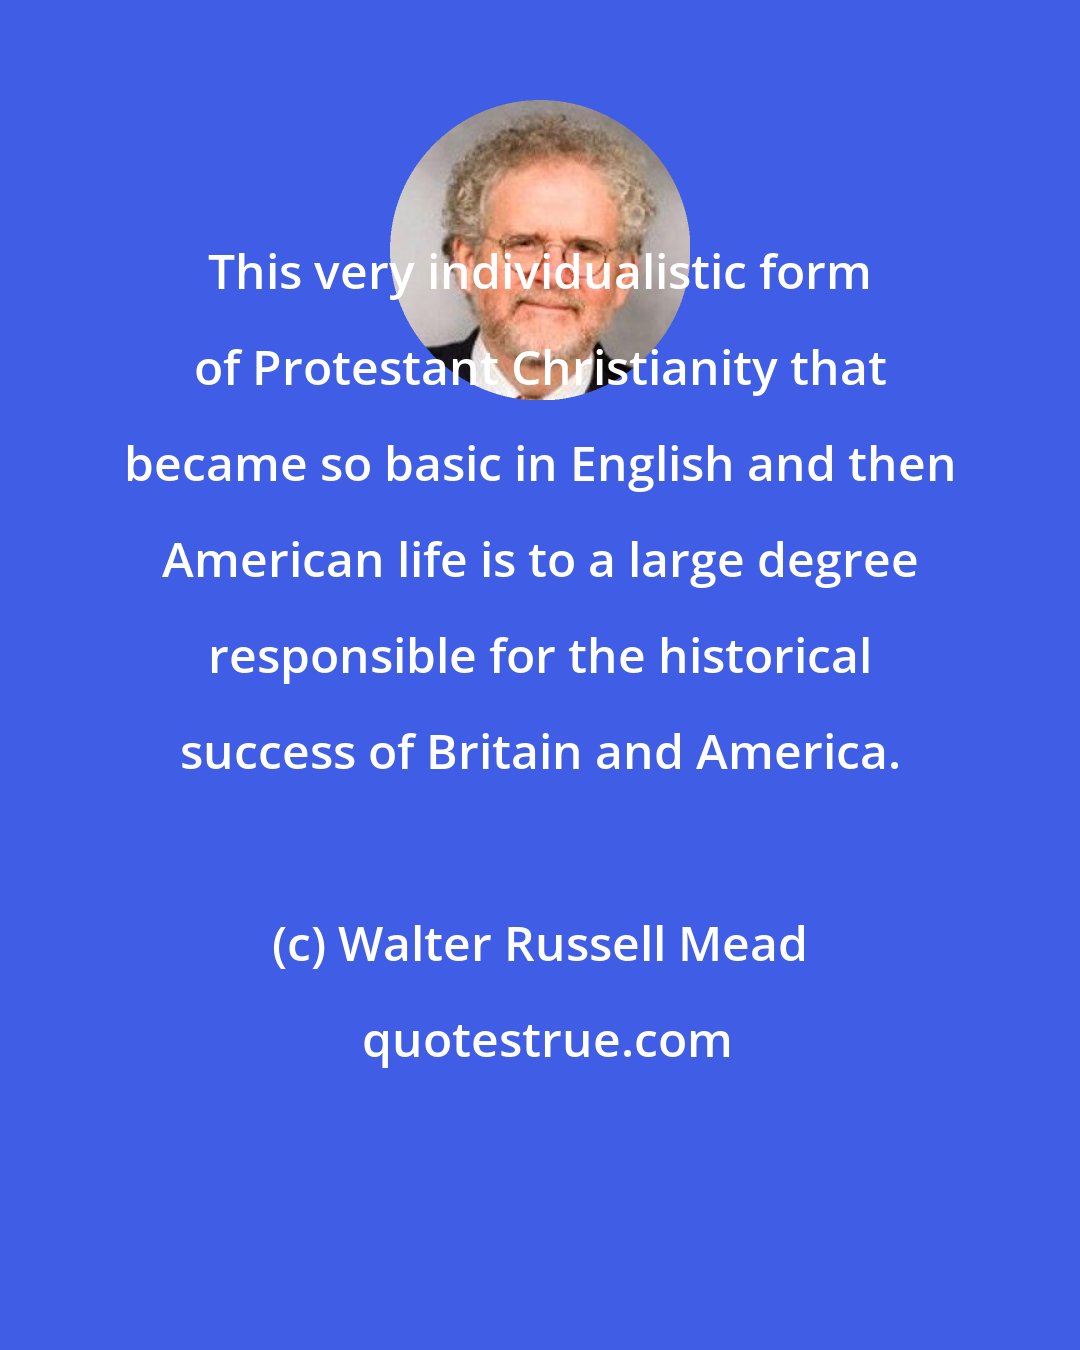 Walter Russell Mead: This very individualistic form of Protestant Christianity that became so basic in English and then American life is to a large degree responsible for the historical success of Britain and America.